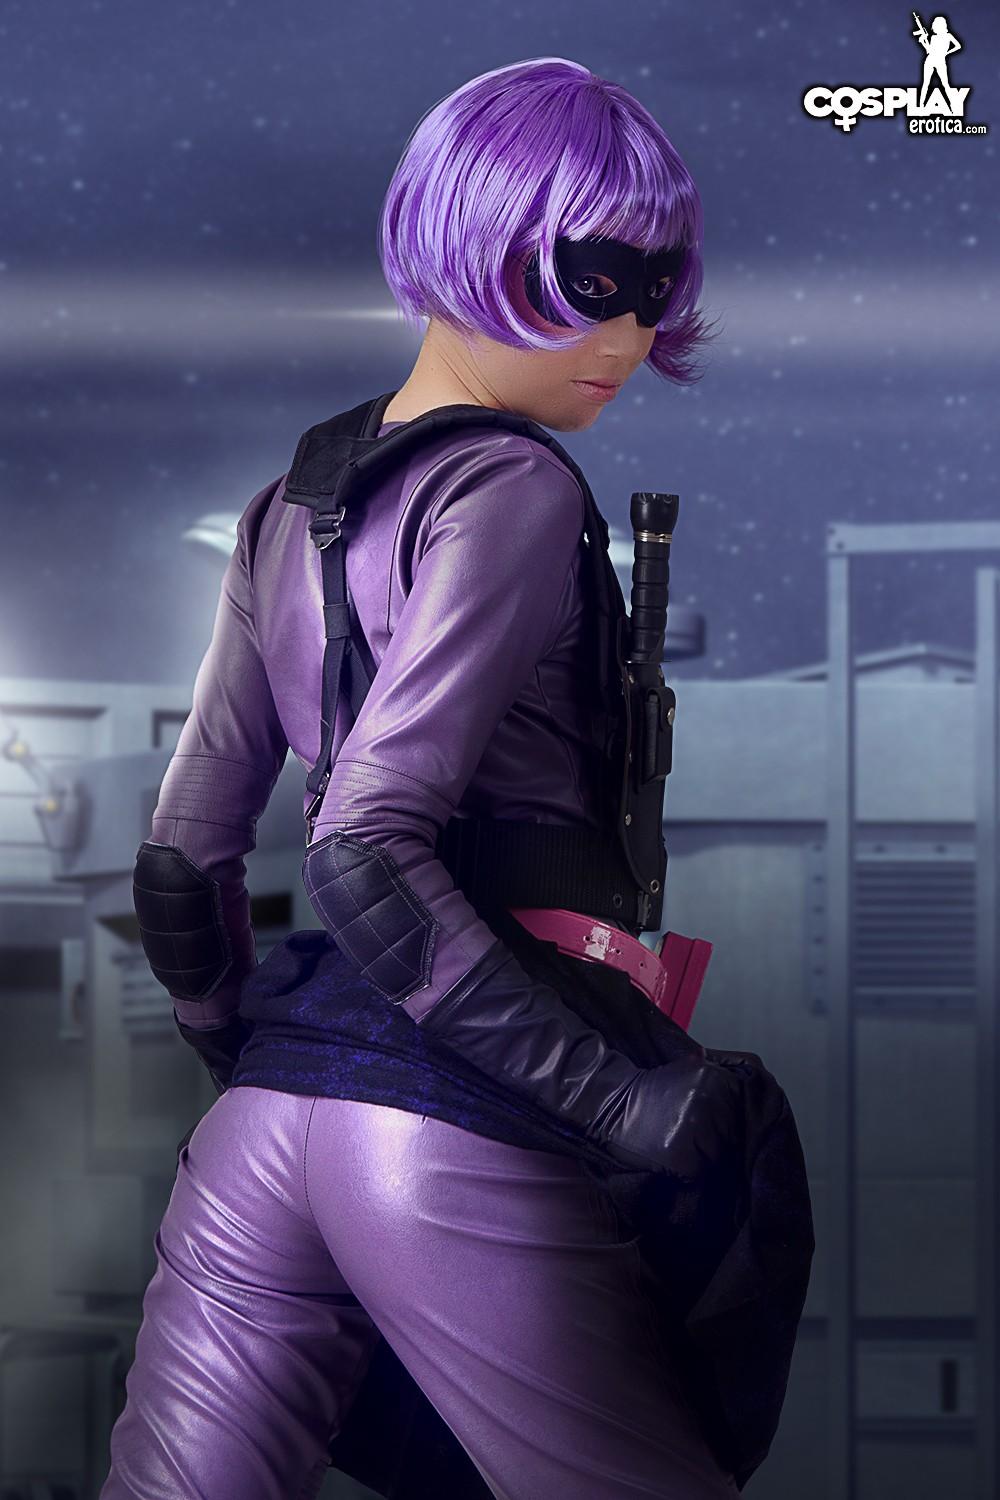 Beautiful cosplayer Stacy dresses up as Hit Girl #60007735